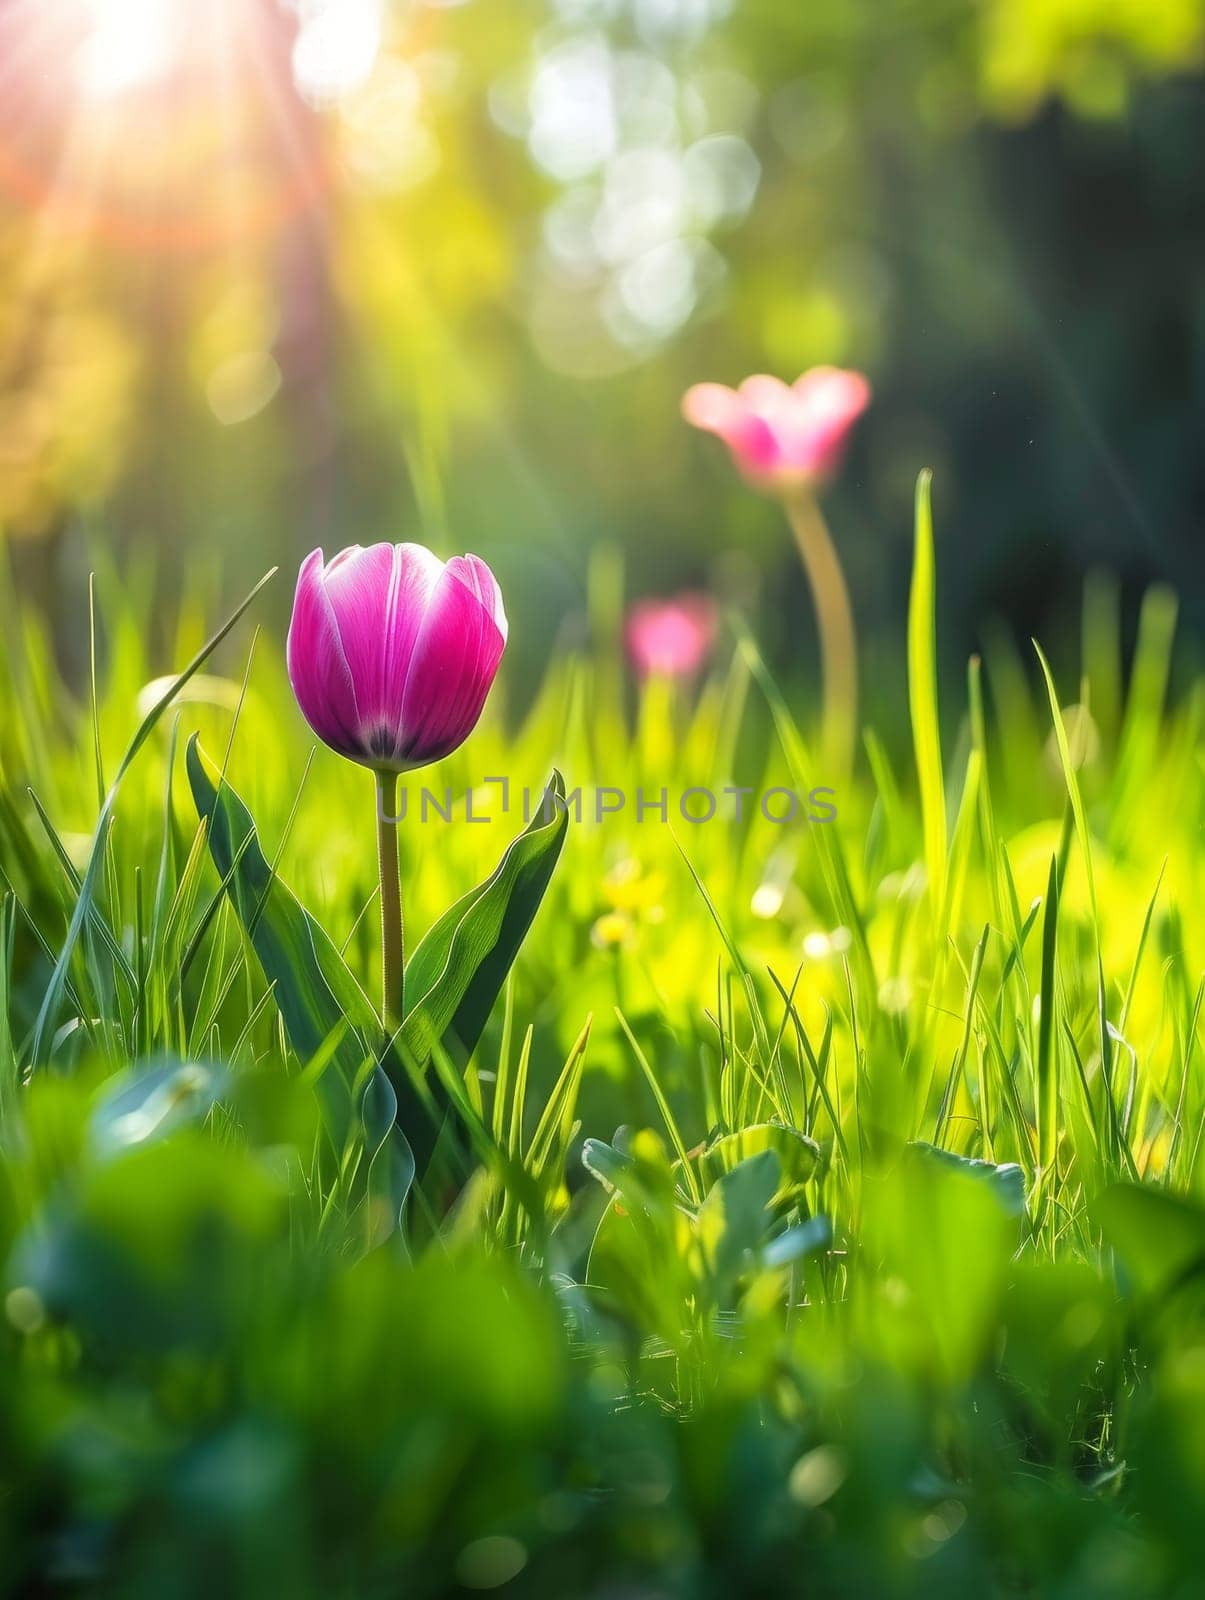 Radiant tulips rise from the green embrace of spring, serenaded by warm sunlight and the promise of new beginnings.